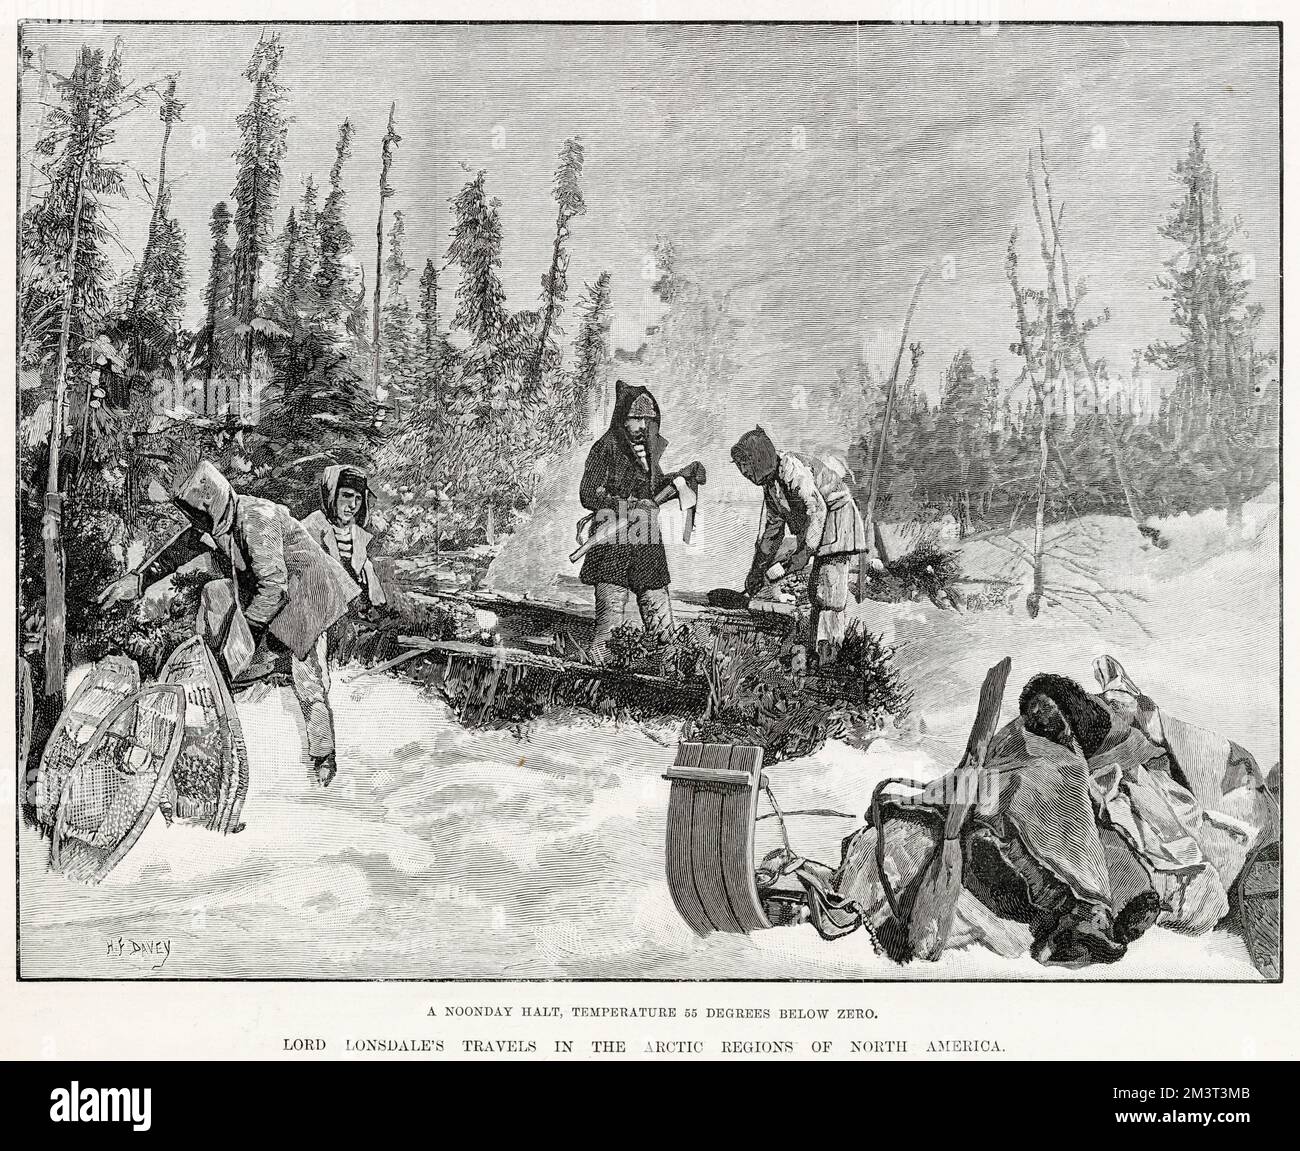 A noonday halt - a 55 degrees below zero. Scene during his expedition in 1889 through North West North America, from the North Saskatchewan River to the shores of the Arctic Ocean across Alaska to the North Pacific. Stock Photo